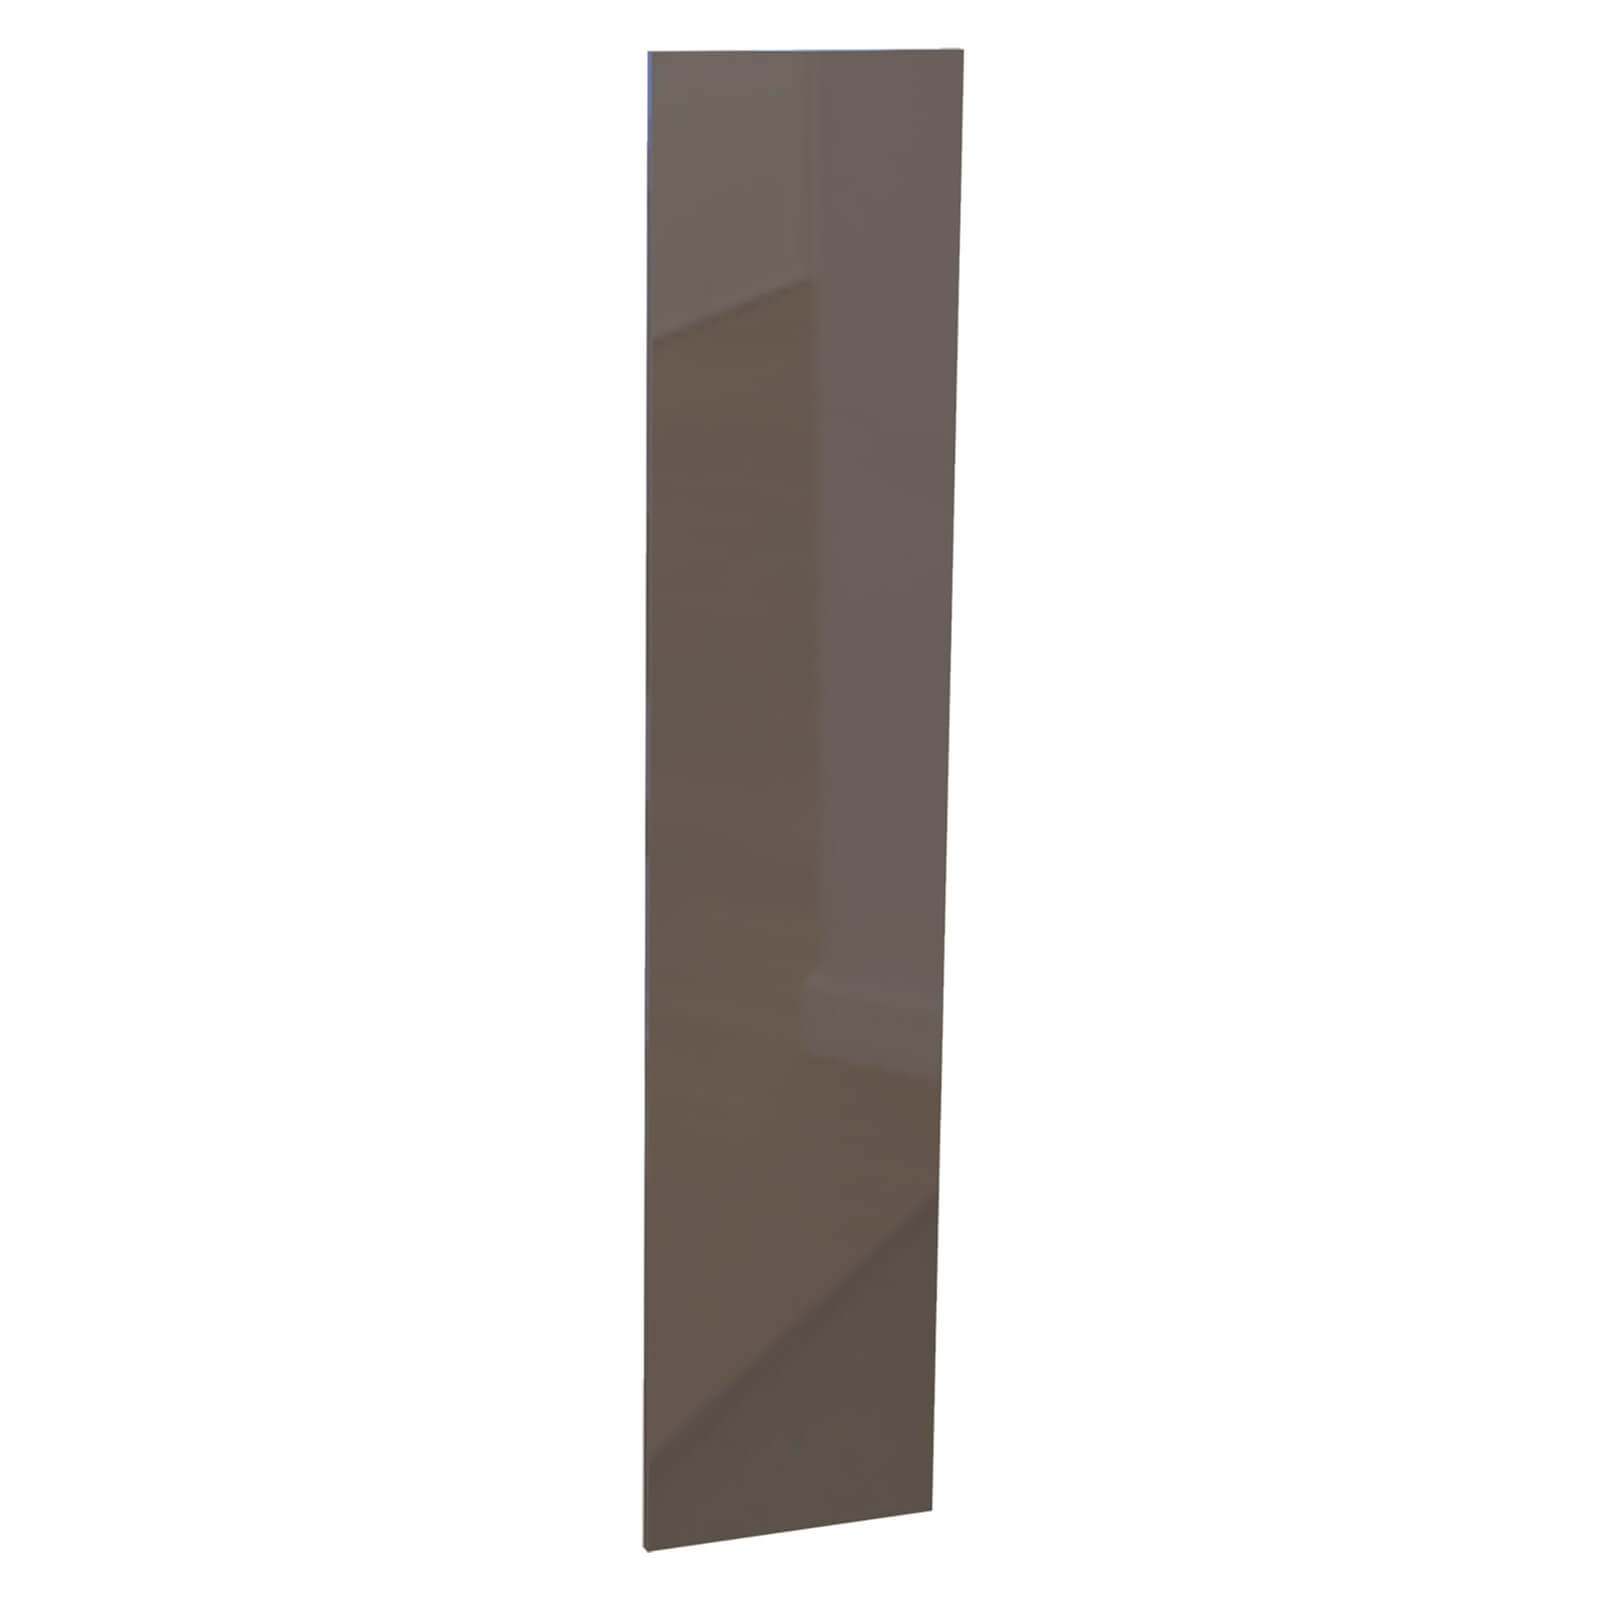 Photo of Fitted Bedroom Slab Wardrobe Door - Champagne